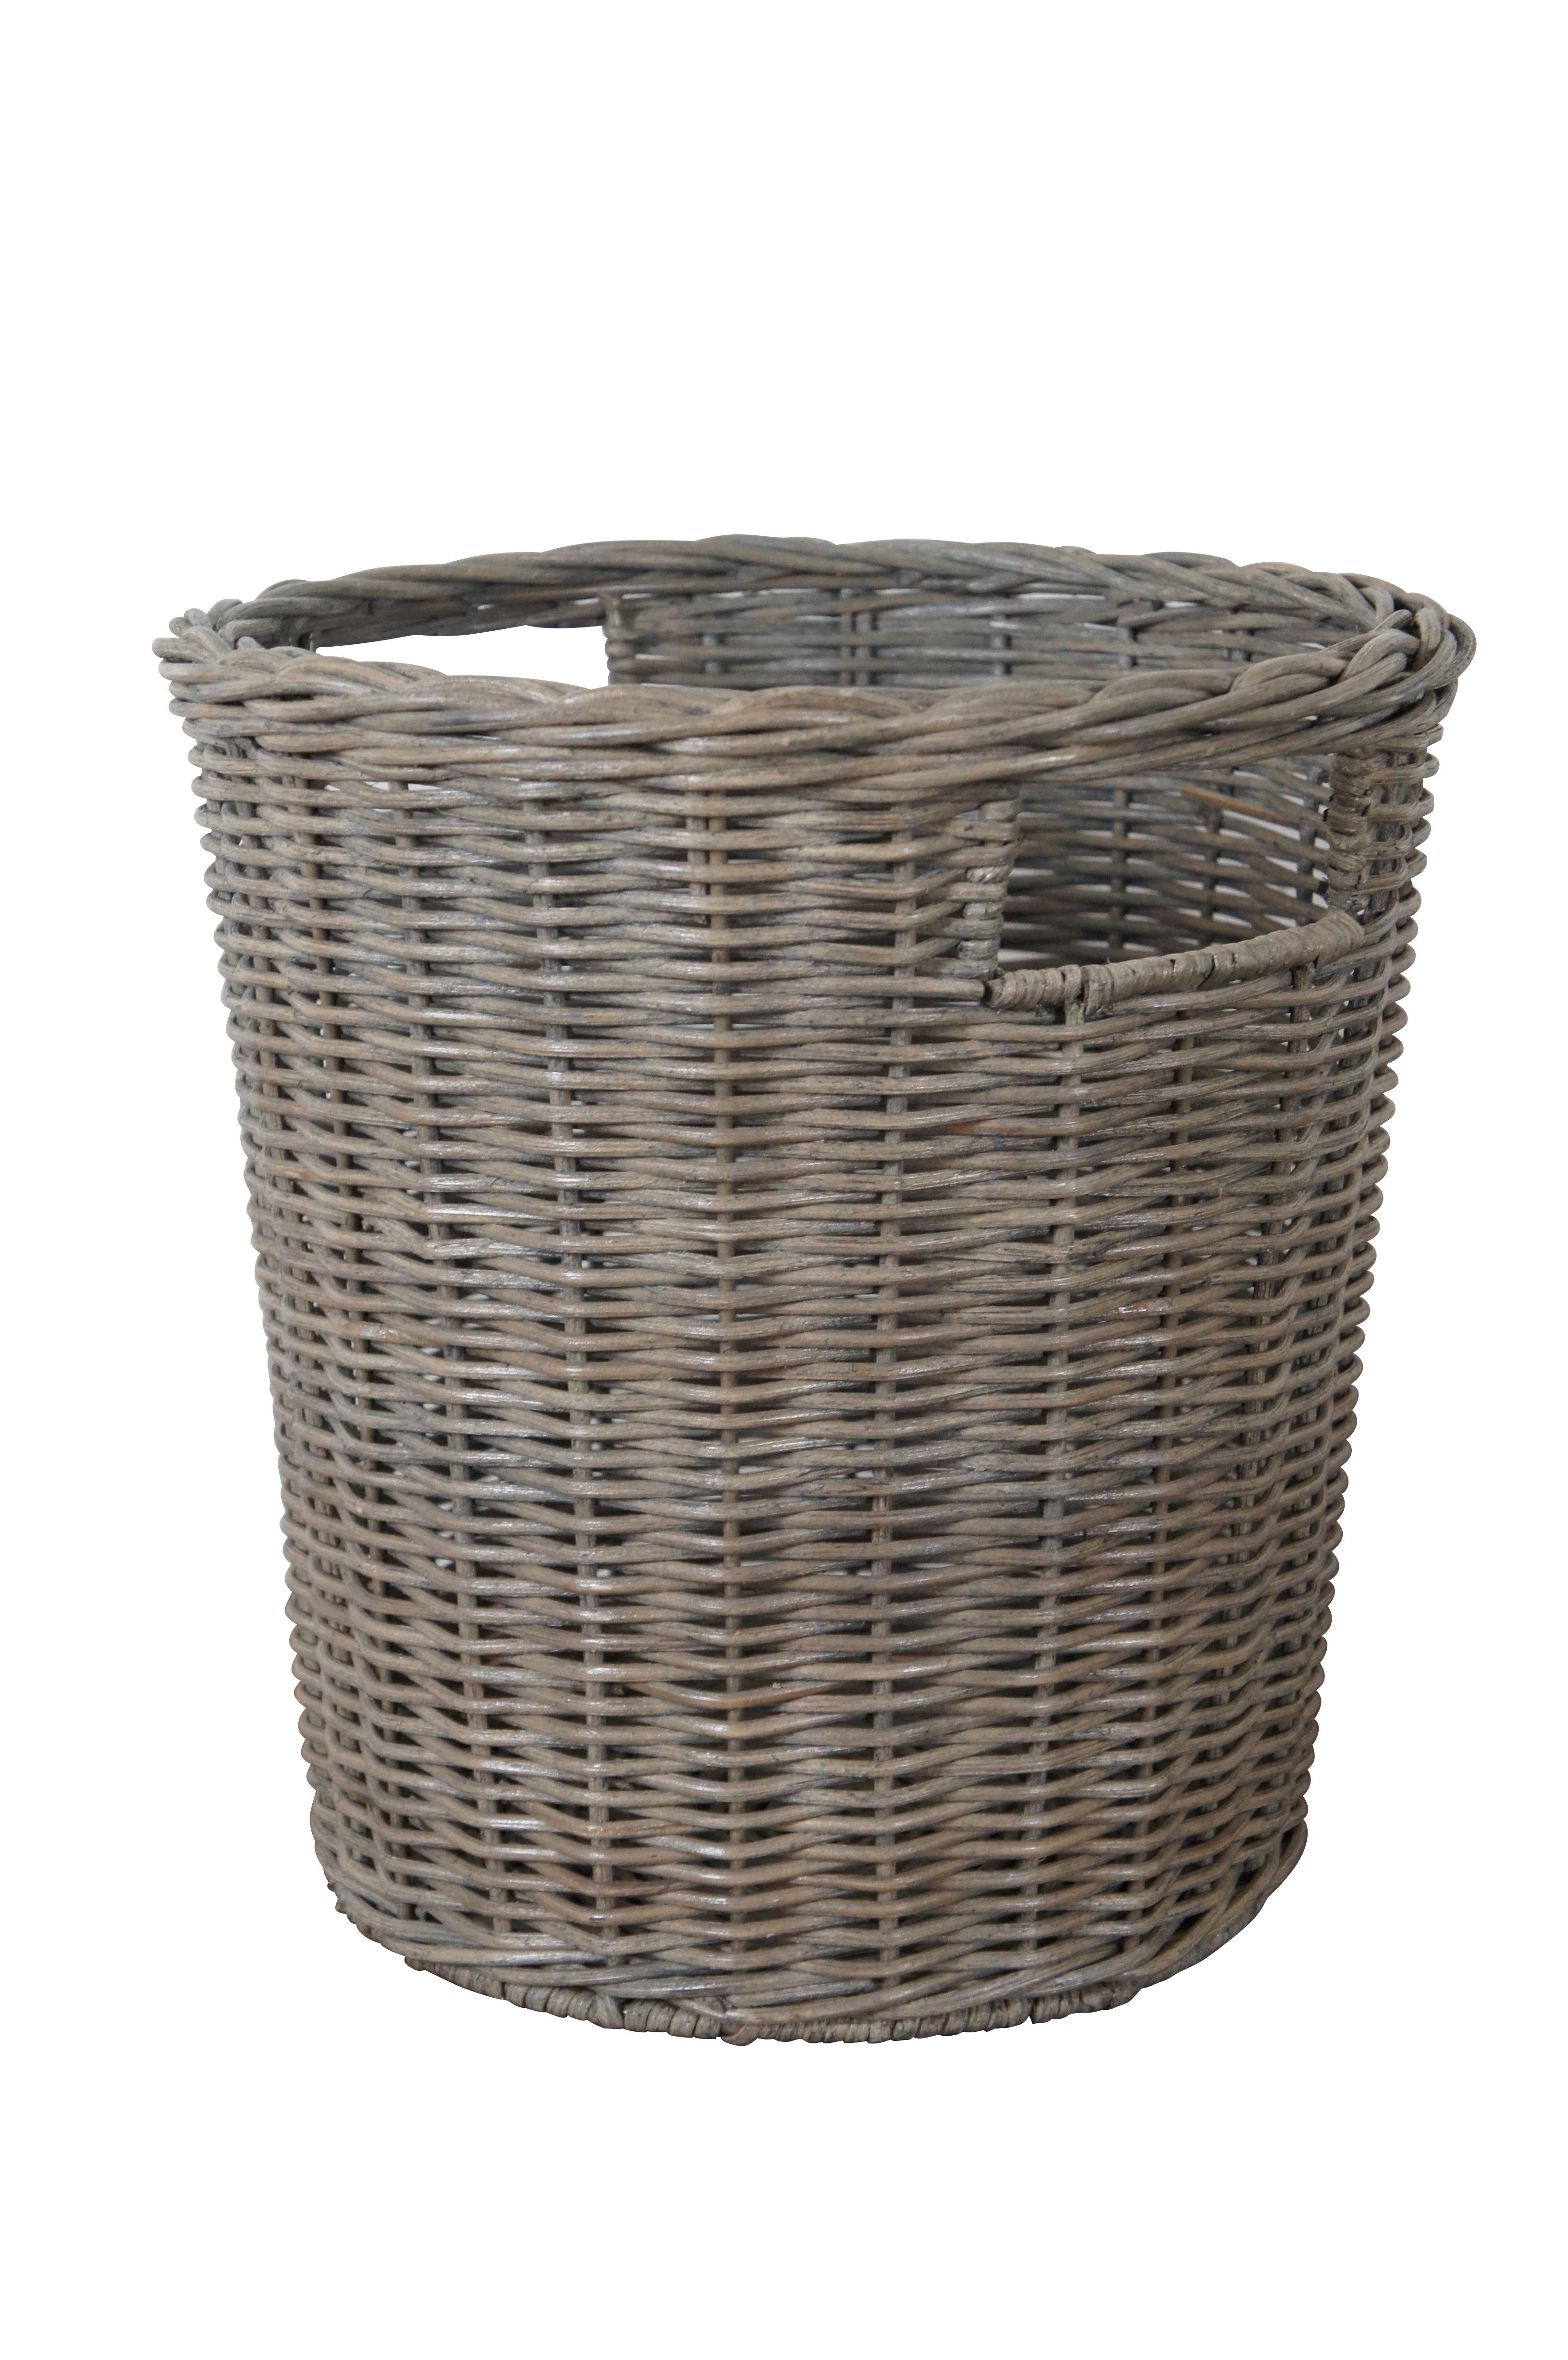 Restoration Hardware Baby & Child - Rutherford Waste / Trash Basket and Changing Table Caddy. 

“In use since the earliest days of civilization, baskets – with their infinite practicality and enduring warmth – truly stand the test of time. Woven